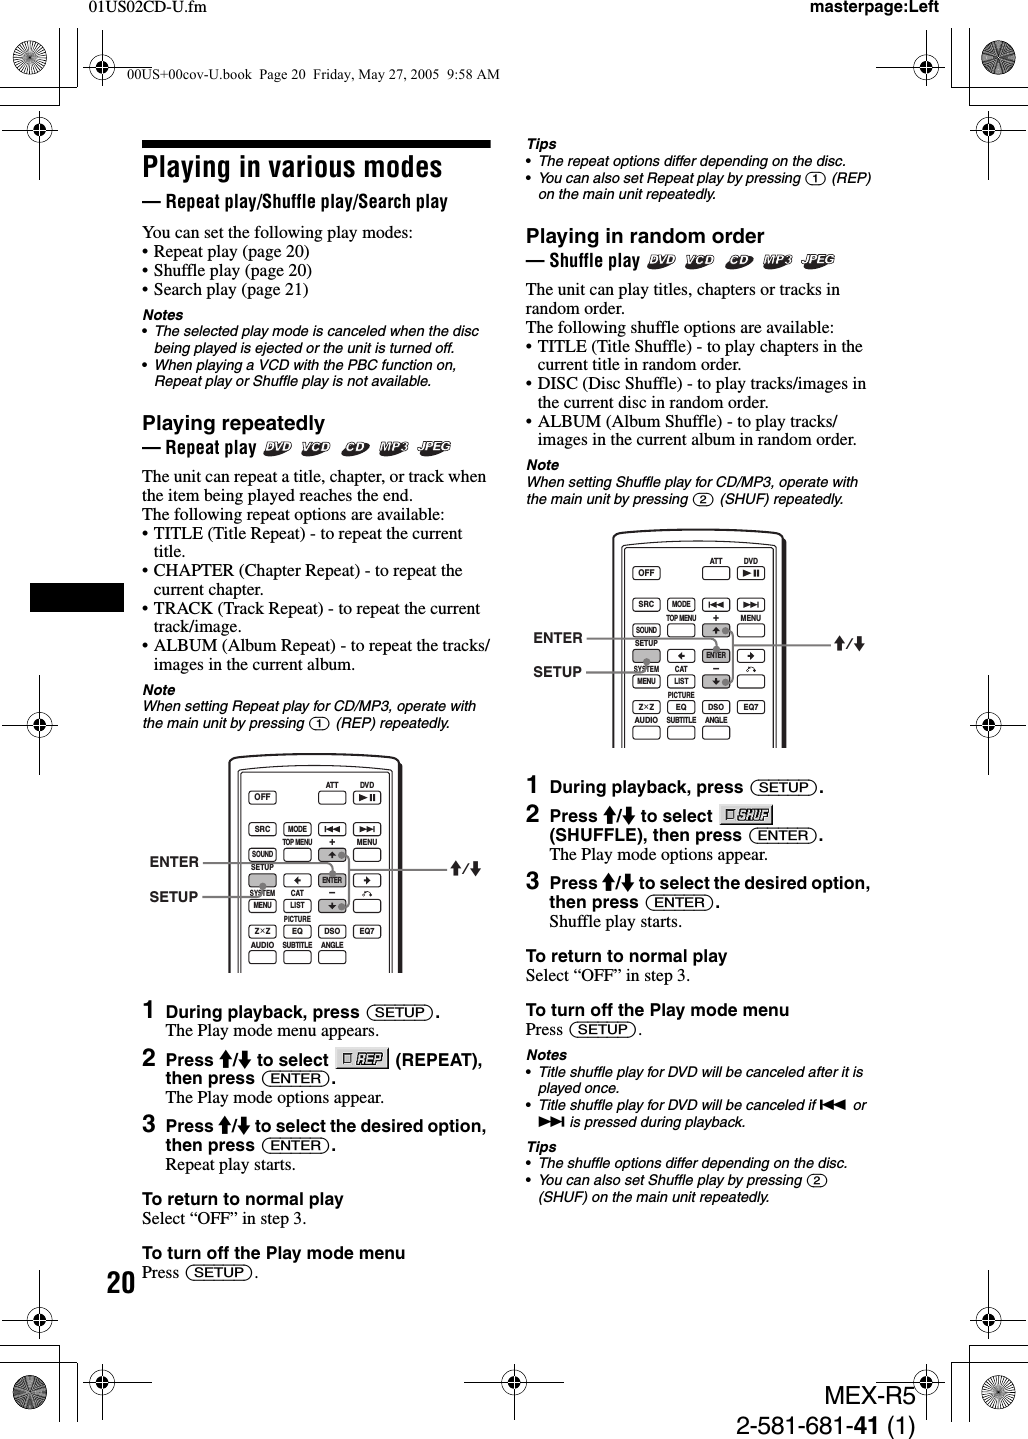 2001US02CD-U.fmMEX-R52-581-681-41 (1)masterpage:LeftPlaying in various modes— Repeat play/Shuffle play/Search playYou can set the following play modes:• Repeat play (page 20)• Shuffle play (page 20)• Search play (page 21)Notes•The selected play mode is canceled when the disc being played is ejected or the unit is turned off.•When playing a VCD with the PBC function on, Repeat play or Shuffle play is not available.Playing repeatedly — Repeat play      The unit can repeat a title, chapter, or track when the item being played reaches the end. The following repeat options are available: • TITLE (Title Repeat) - to repeat the current title.• CHAPTER (Chapter Repeat) - to repeat the current chapter.• TRACK (Track Repeat) - to repeat the current track/image.• ALBUM (Album Repeat) - to repeat the tracks/images in the current album.NoteWhen setting Repeat play for CD/MP3, operate with the main unit by pressing (1) (REP) repeatedly.1During playback, press (SETUP).The Play mode menu appears.2Press M/m to select   (REPEAT), then press (ENTER).The Play mode options appear.3Press M/m to select the desired option, then press (ENTER).Repeat play starts.To return to normal playSelect “OFF” in step 3.To turn off the Play mode menuPress (SETUP).Tips•The repeat options differ depending on the disc.•You can also set Repeat play by pressing (1) (REP) on the main unit repeatedly.Playing in random order— Shuffle play      The unit can play titles, chapters or tracks in random order.The following shuffle options are available:• TITLE (Title Shuffle) - to play chapters in the current title in random order.• DISC (Disc Shuffle) - to play tracks/images in the current disc in random order. • ALBUM (Album Shuffle) - to play tracks/images in the current album in random order.NoteWhen setting Shuffle play for CD/MP3, operate with the main unit by pressing (2) (SHUF) repeatedly.1During playback, press (SETUP).2Press M/m to select   (SHUFFLE), then press (ENTER).The Play mode options appear.3Press M/m to select the desired option, then press (ENTER).Shuffle play starts.To return to normal playSelect “OFF” in step 3.To turn off the Play mode menuPress (SETUP).Notes•Title shuffle play for DVD will be canceled after it is played once.•Title shuffle play for DVD will be canceled if . or &gt; is pressed during playback.Tips•The shuffle options differ depending on the disc.•You can also set Shuffle play by pressing (2) (SHUF) on the main unit repeatedly.SRCMODEATT DVDSOUNDTOP MENUMENUSETUPENTERSYSTEMMENU LISTCATEQZ × Z DSO EQ7PICTUREAUDIOSUBTITLEANGLEOFF+–ENTERSETUPM/mSRCMODEATT DVDSOUNDTOP MENUMENUSETUPENTERSYSTEMMENU LISTCATEQZ × Z DSO EQ7PICTUREAUDIOSUBTITLEANGLEOFF+–ENTERSETUPM/m00US+00cov-U.book  Page 20  Friday, May 27, 2005  9:58 AM